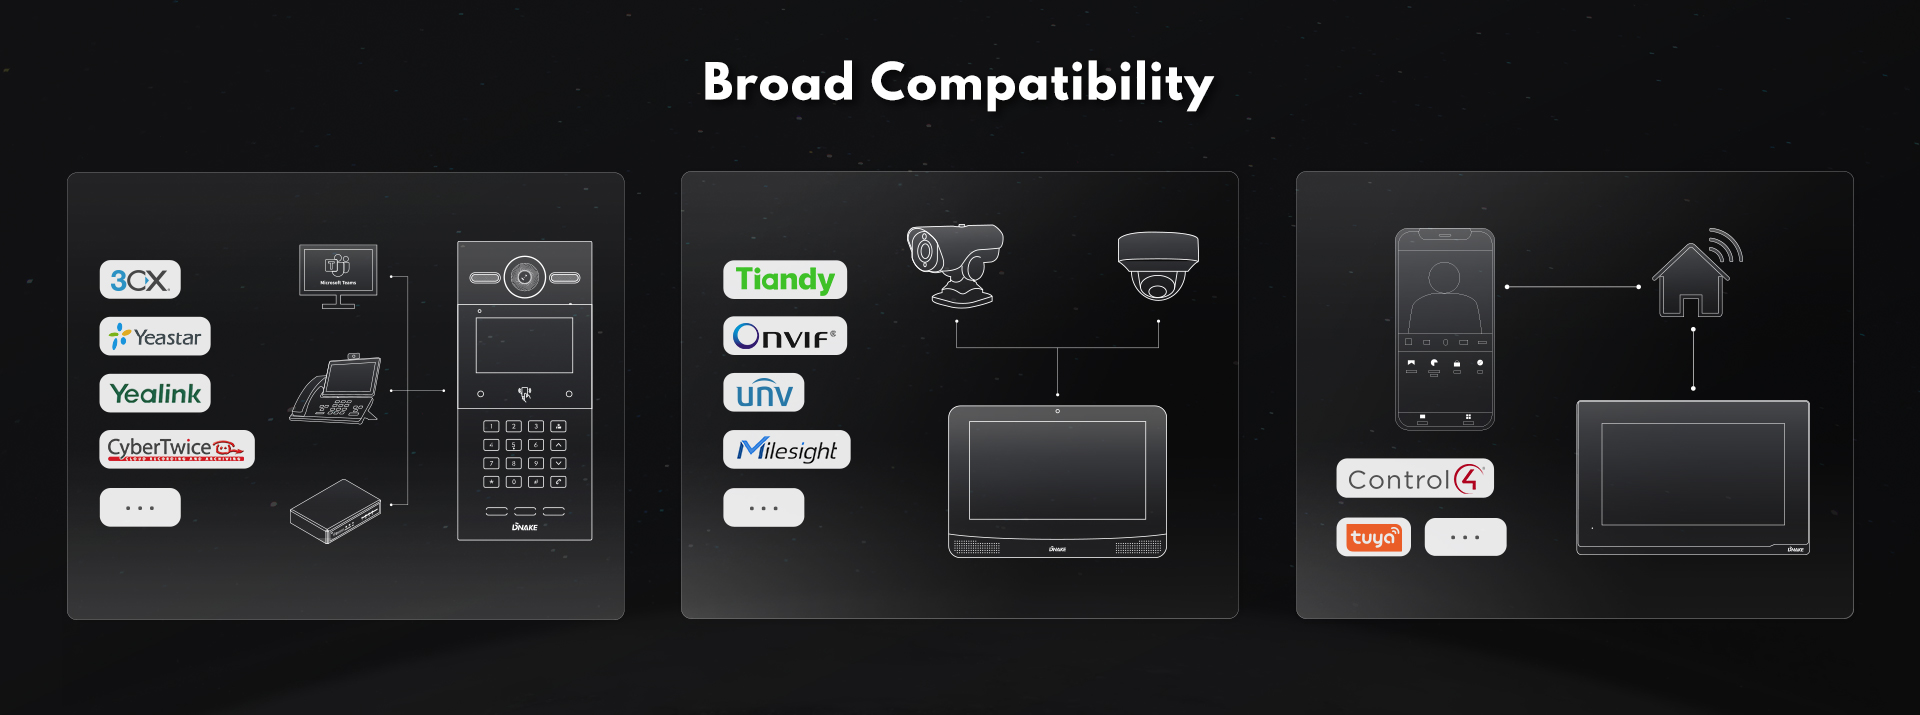 Broad Compatibility-1920x715px